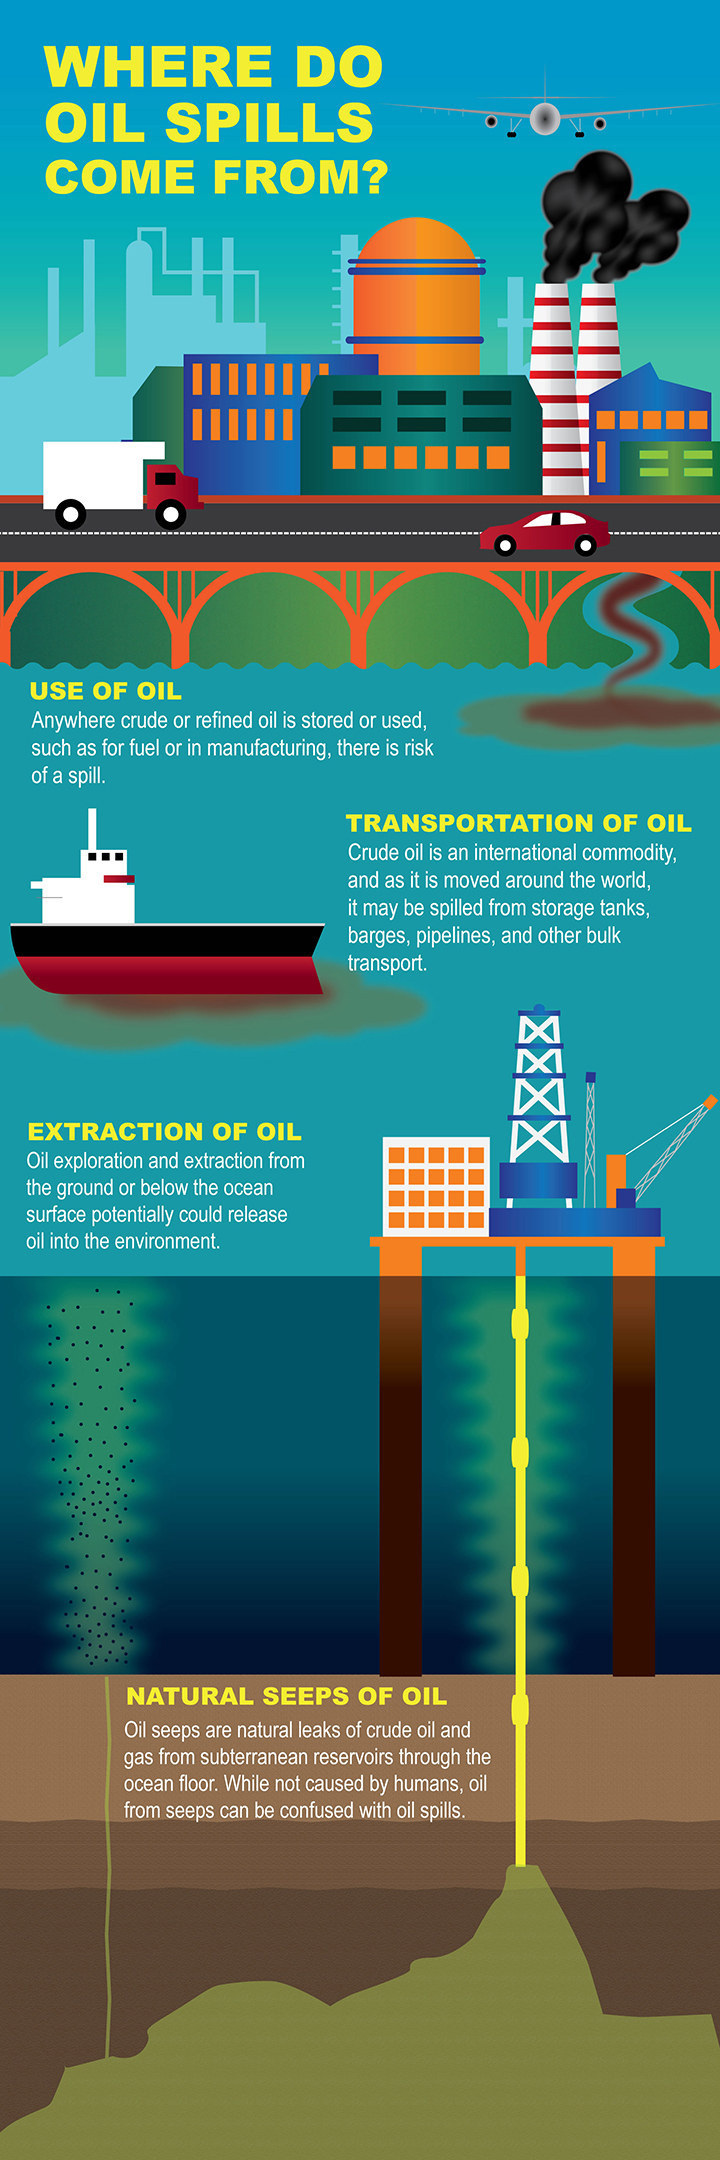 Graphic showing buildings and cars using oil, a tanker transporting oil, and a rig drilling for oil in the ocean, with a natural seep leaking oil out of the seafloor. Use of oil: Anywhere crude or refined oil is stored or used, such as for fuel or in manufacturing, there is risk of a spill. Transportation of oil: Crude oil is an international commodity, and as it is moved around the world, it may be spilled from storage tanks, barges, pipelines, and other bulk transport. Extraction of oil: Oil exploration and extraction from the ground or below the ocean surface potentially could release oil into the environment. Natural seeps of oil: Oil seeps are natural leaks of crude oil and gas from subterranean reservoirs through the ocean floor. While not caused by humans, oil from seeps can be confused with oil spills.